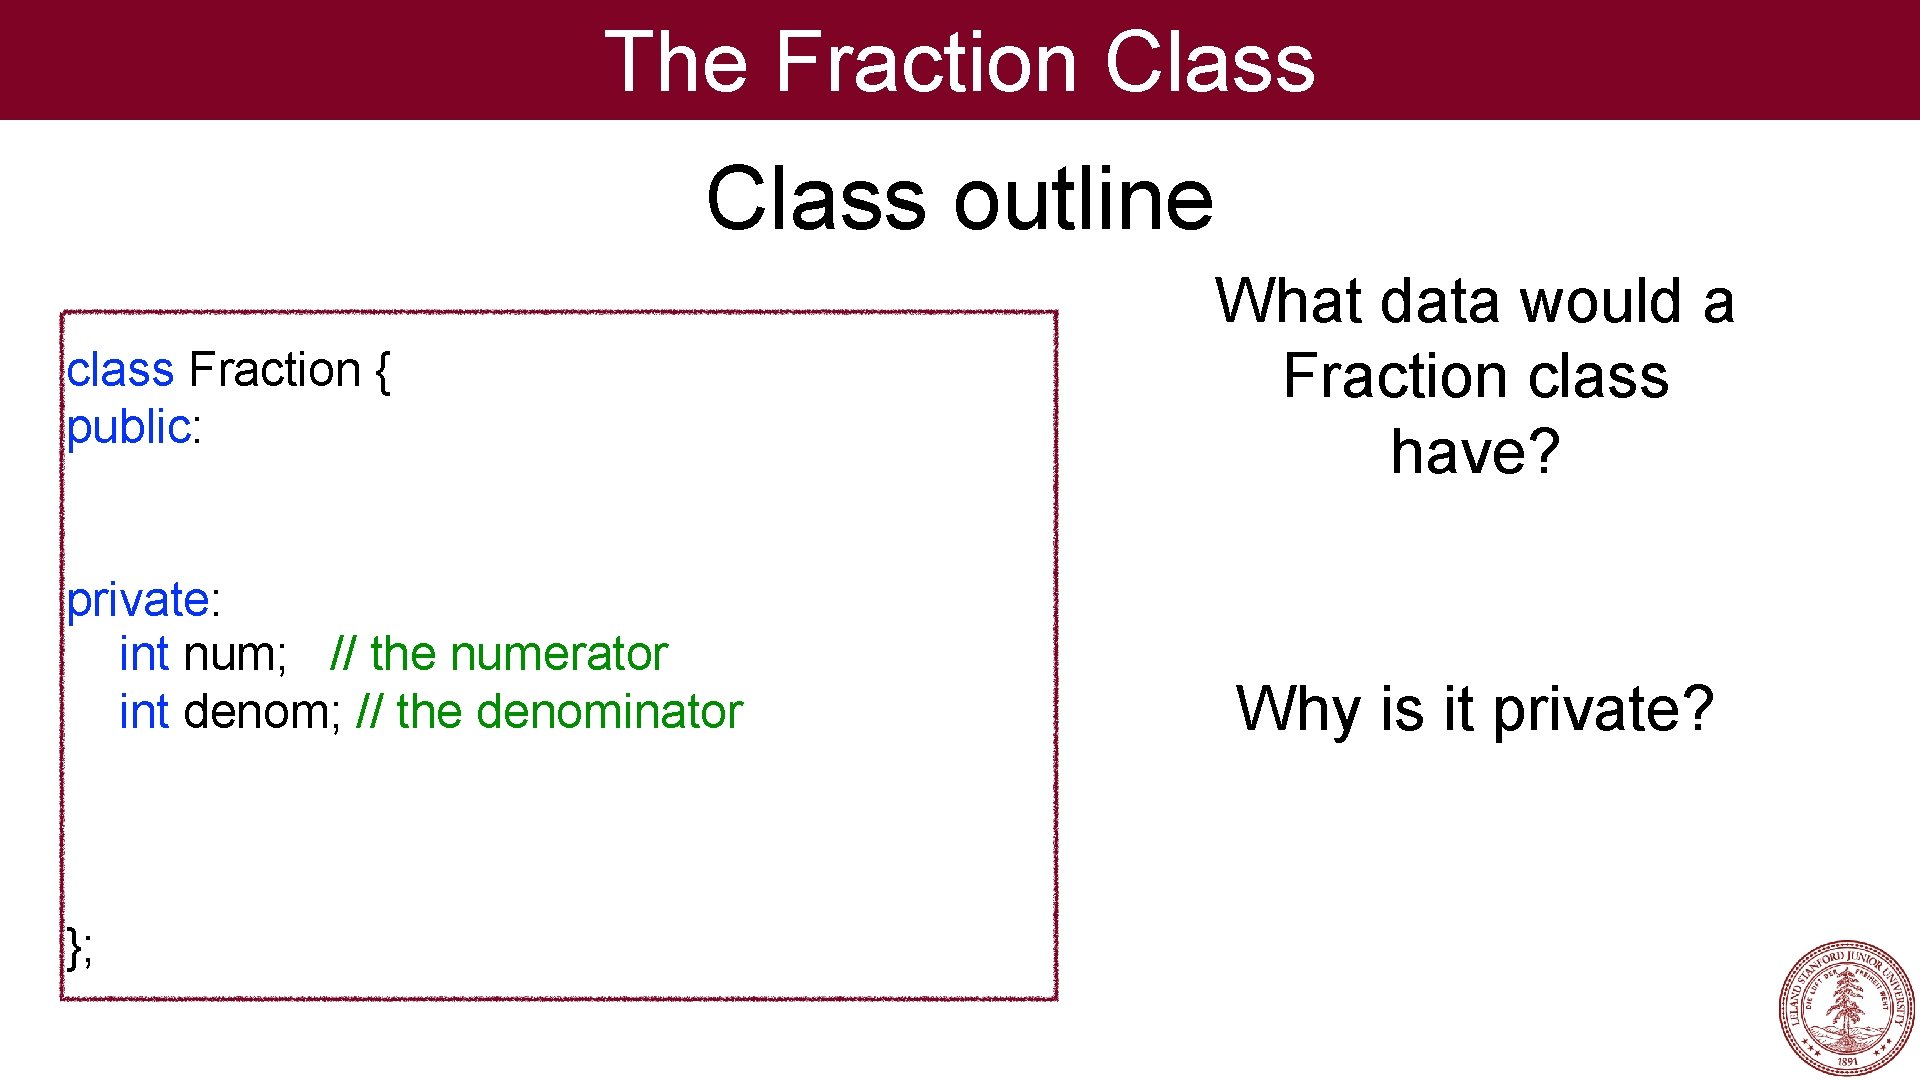 The Fraction Class outline class Fraction { public: private: int num; // the numerator